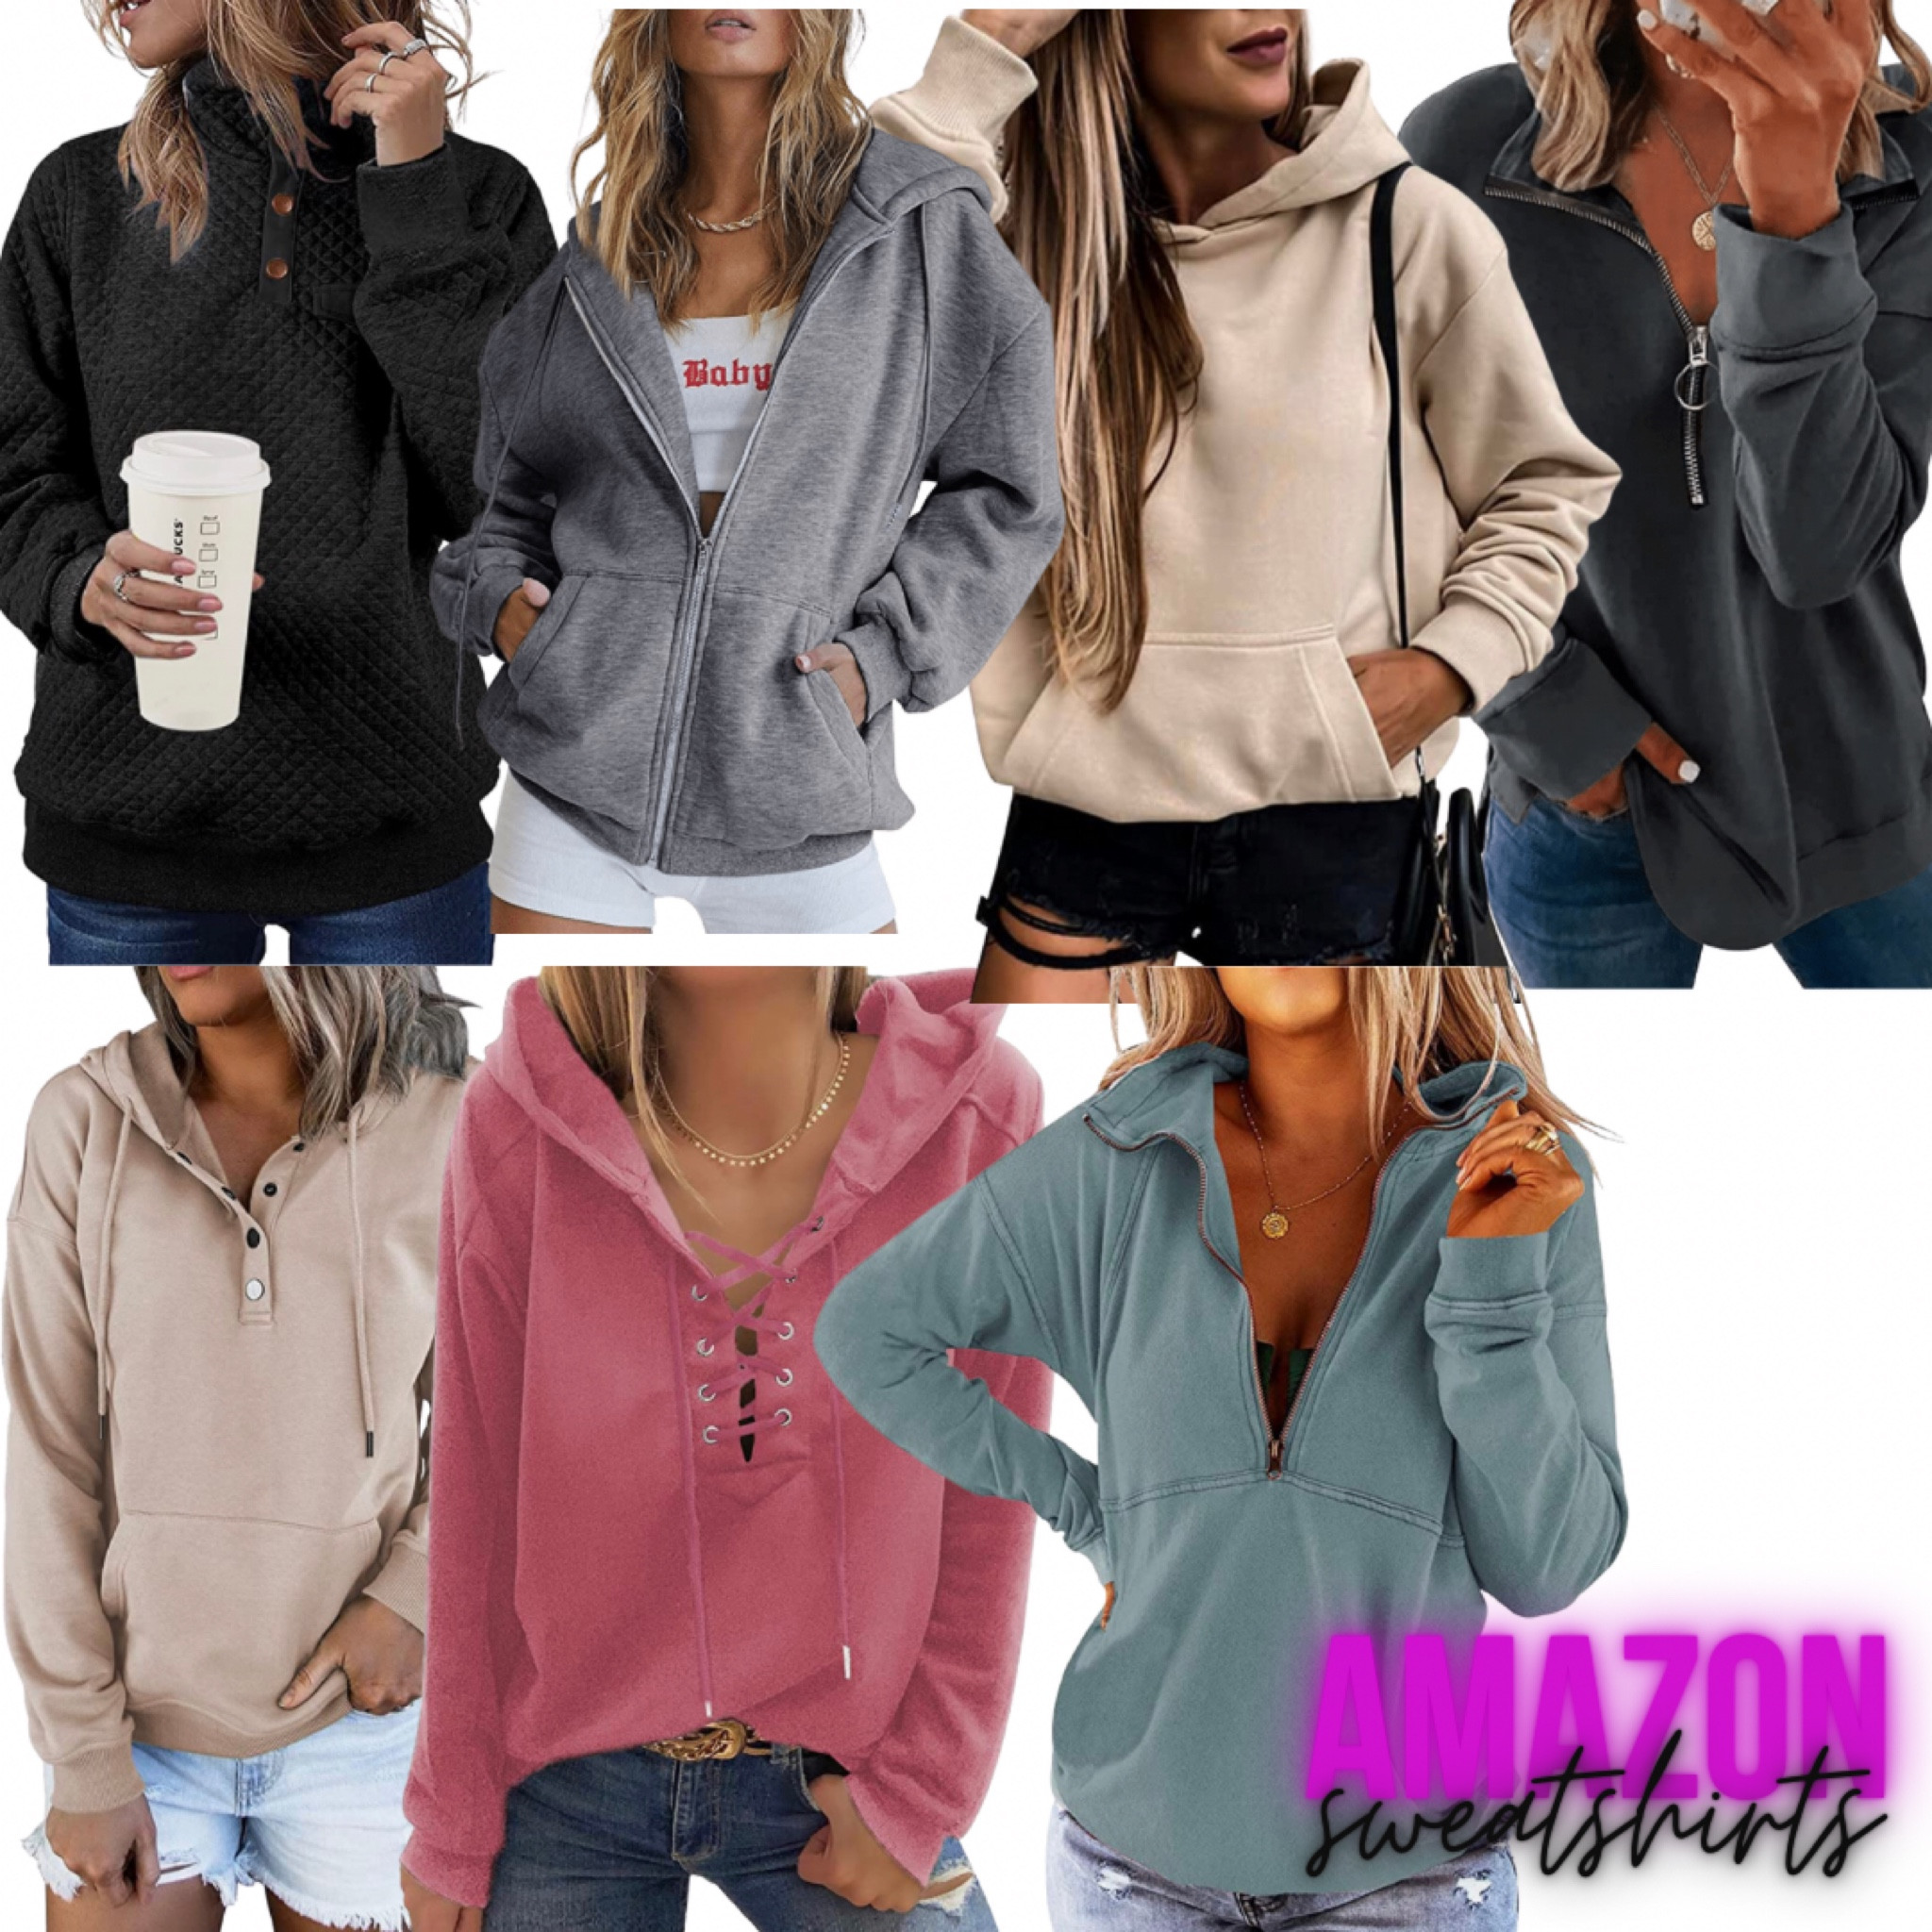 Farysays Women's 2022 Casual Hoodies V Neck Lace Up Criss Cross Long Sleeve Drawstring Pullover Sweatshirts Tops